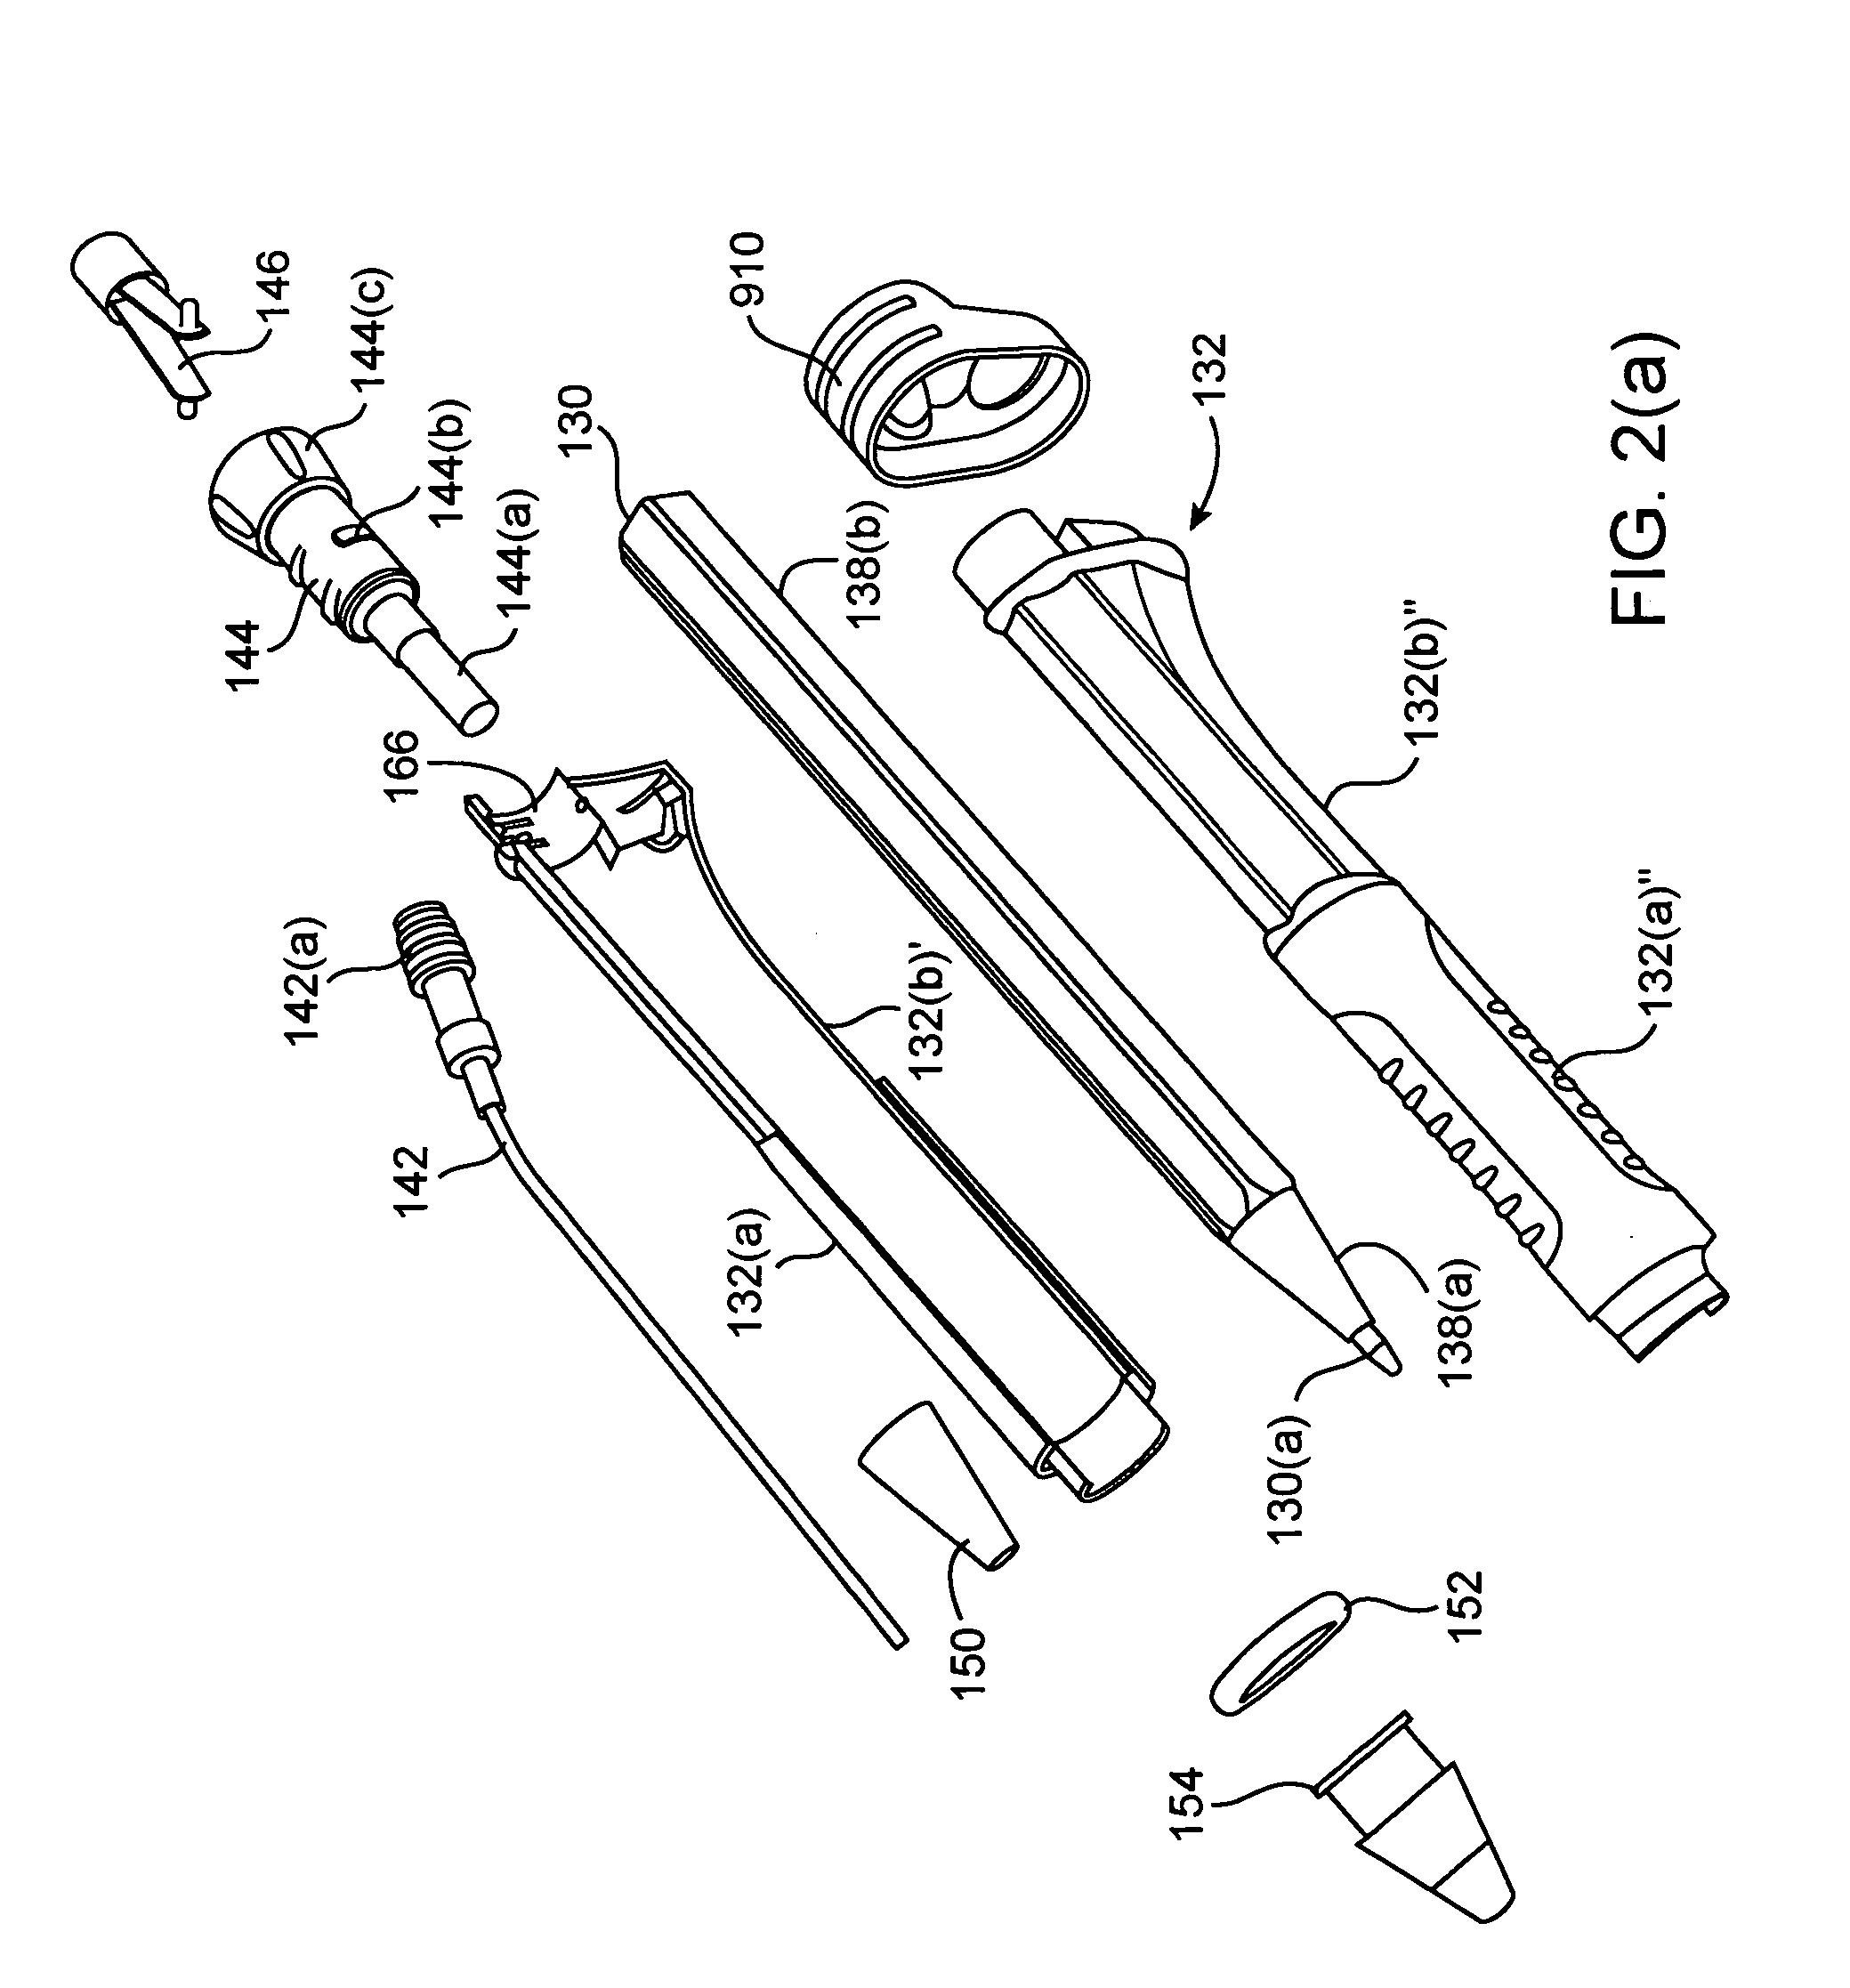 Writing stylus for electrographic position location apparatus